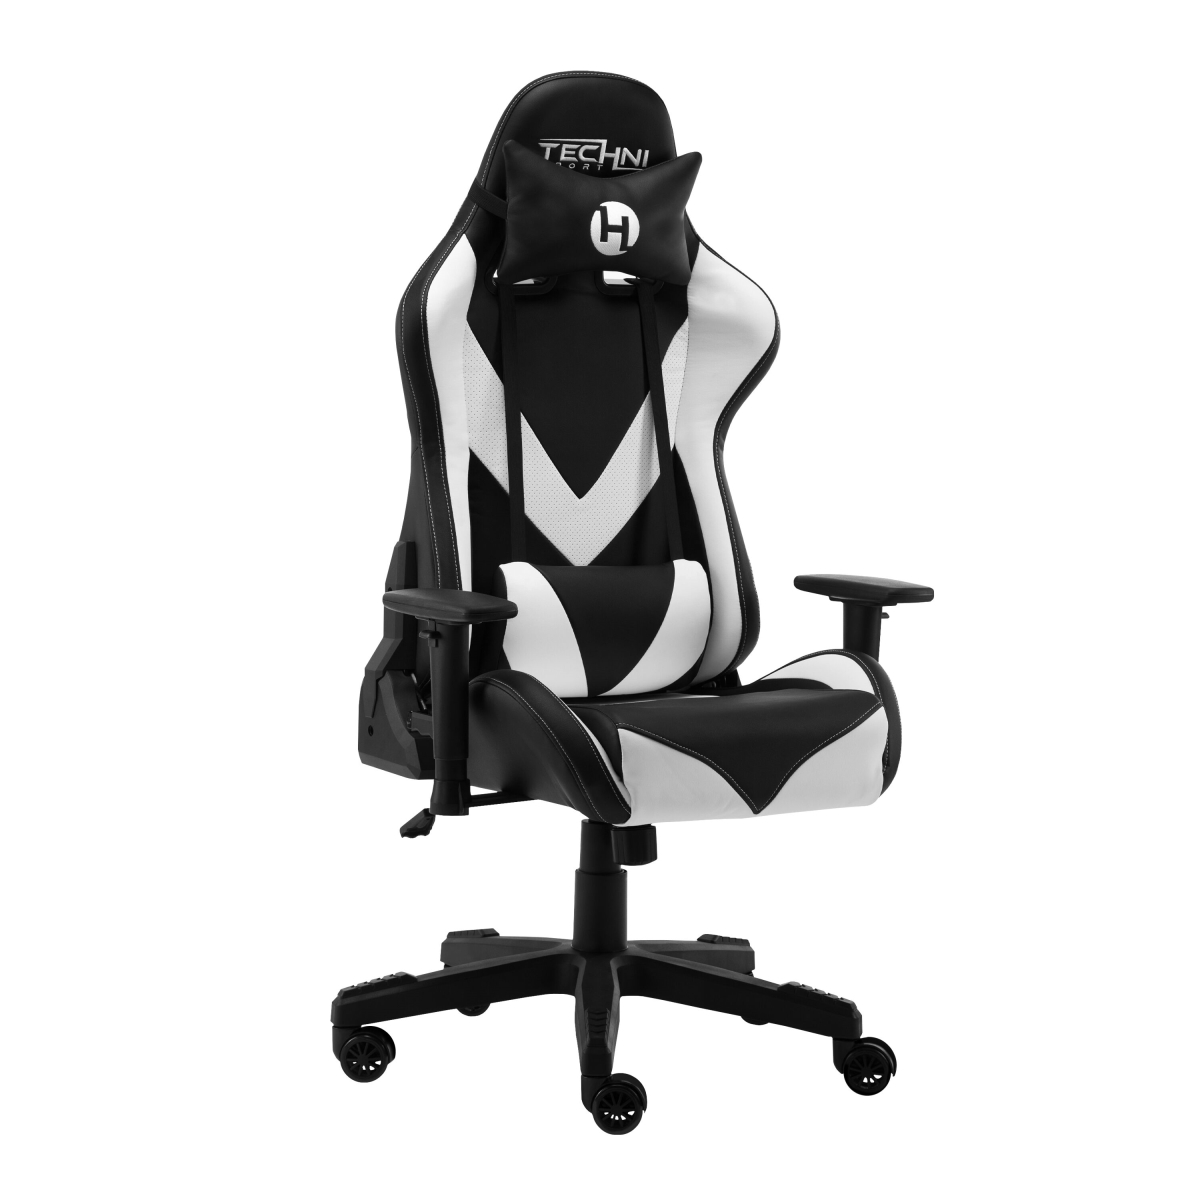 Rta-ts92-wht Office-pc Gaming Chair, White - 33 X 26 X 13 In.